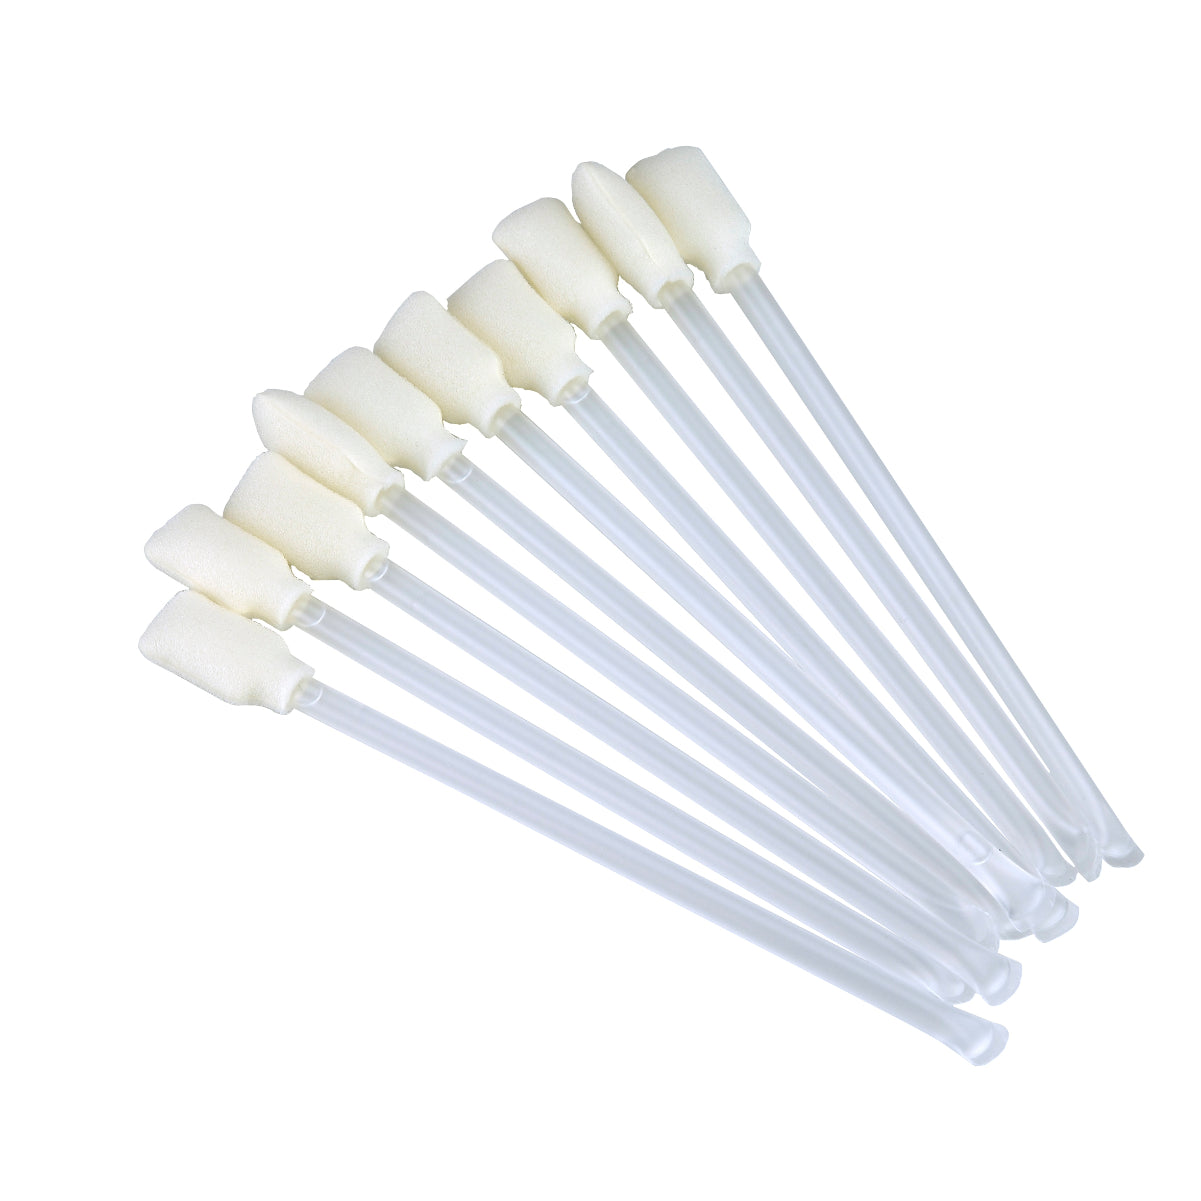 Ten print head cleaning swabs from Evolis A5003 cleaning kit.